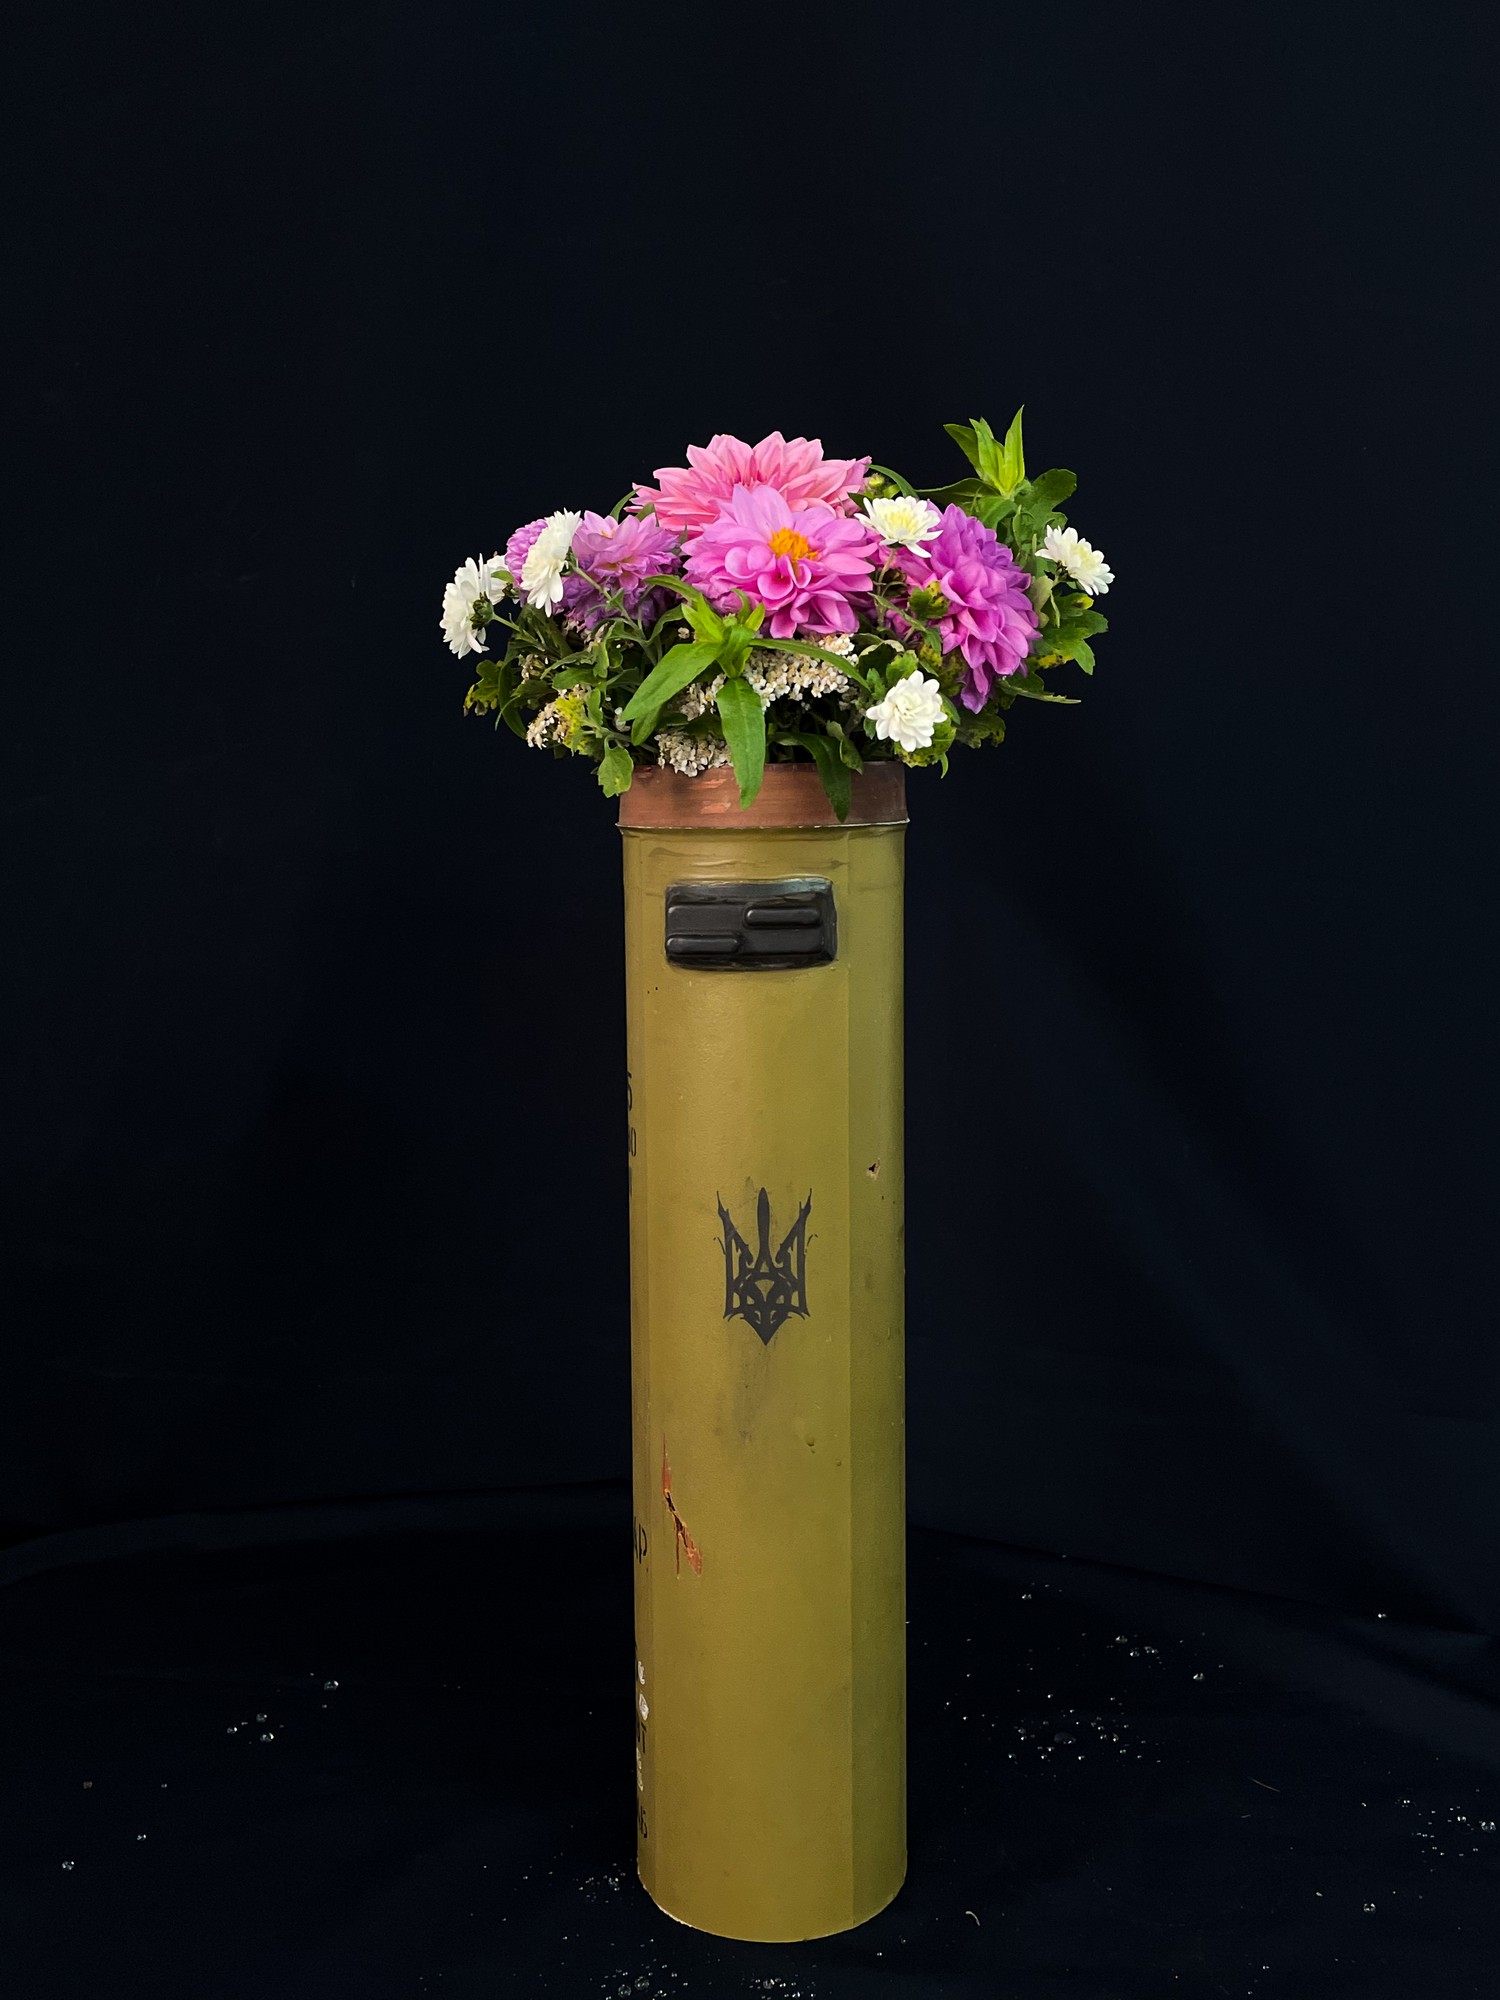 Vase is made of RPG-18 Mukha